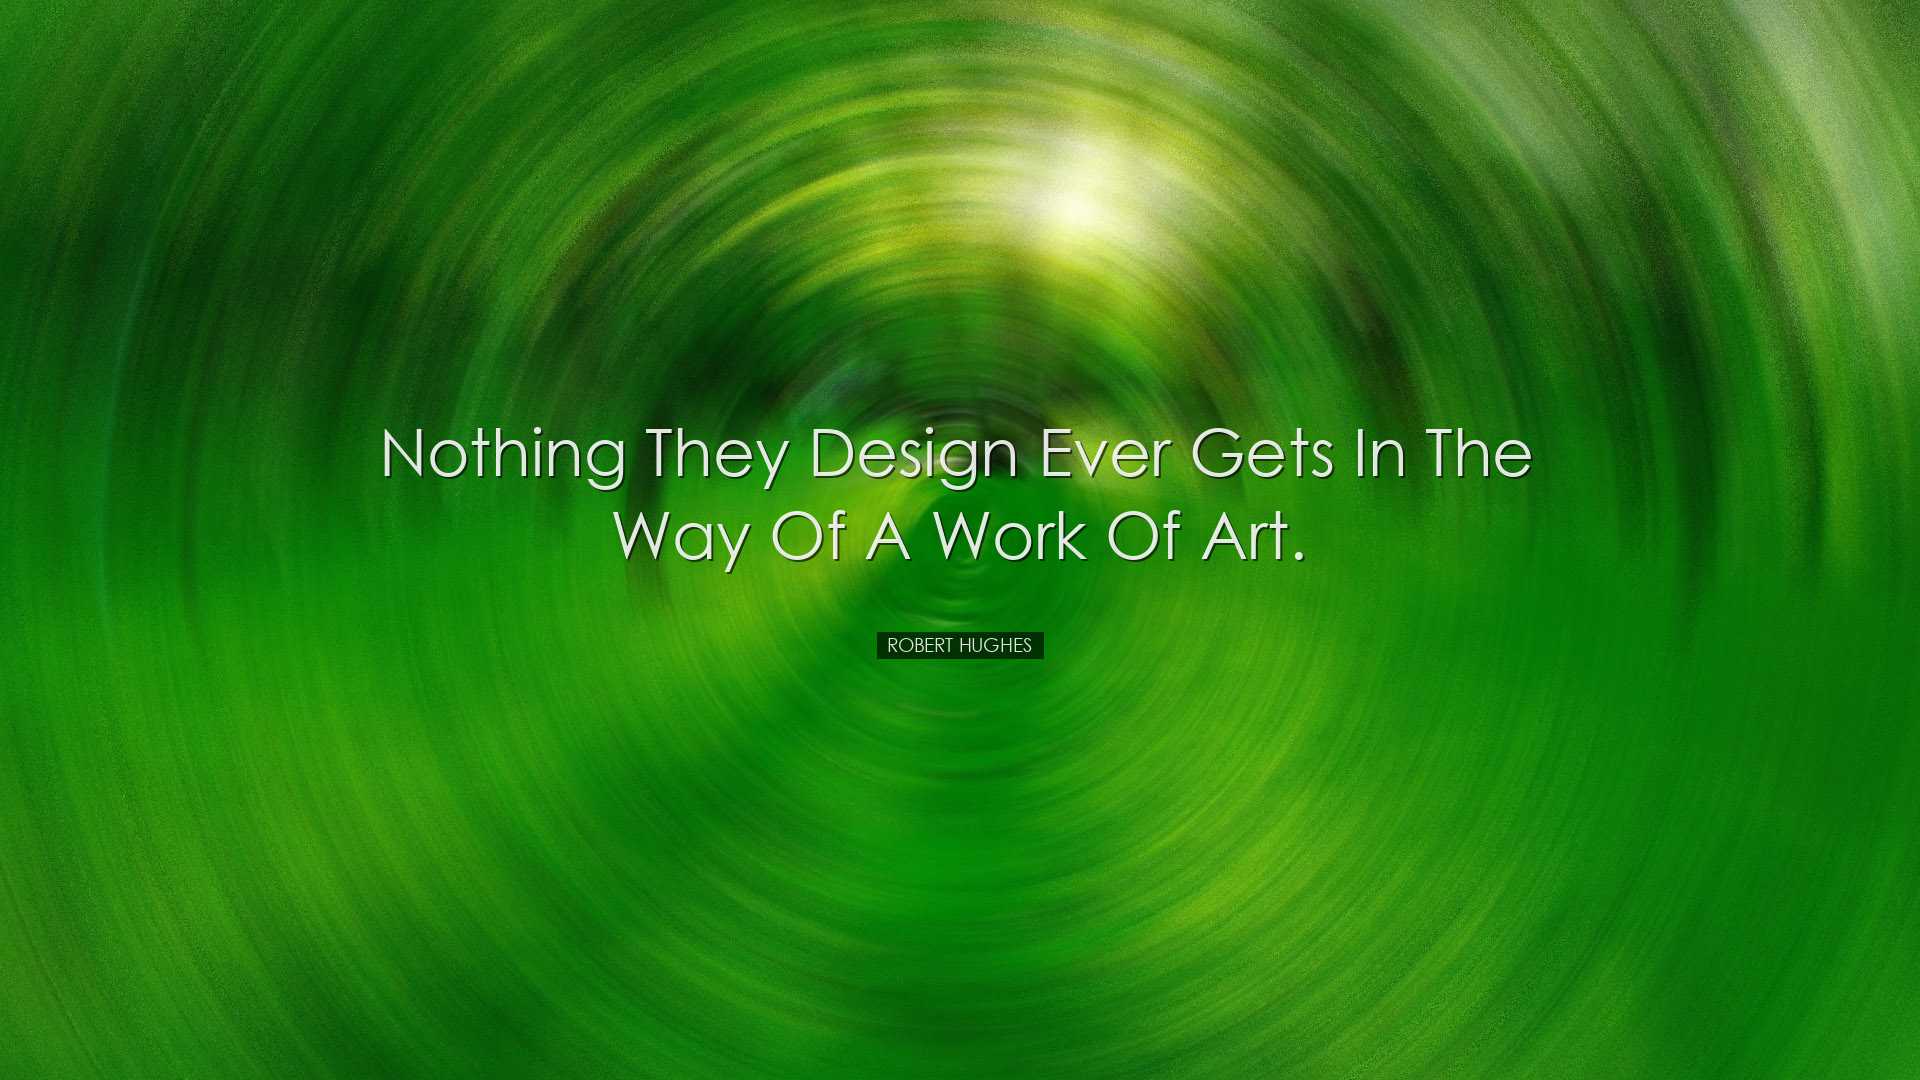 Nothing they design ever gets in the way of a work of art. - Rober